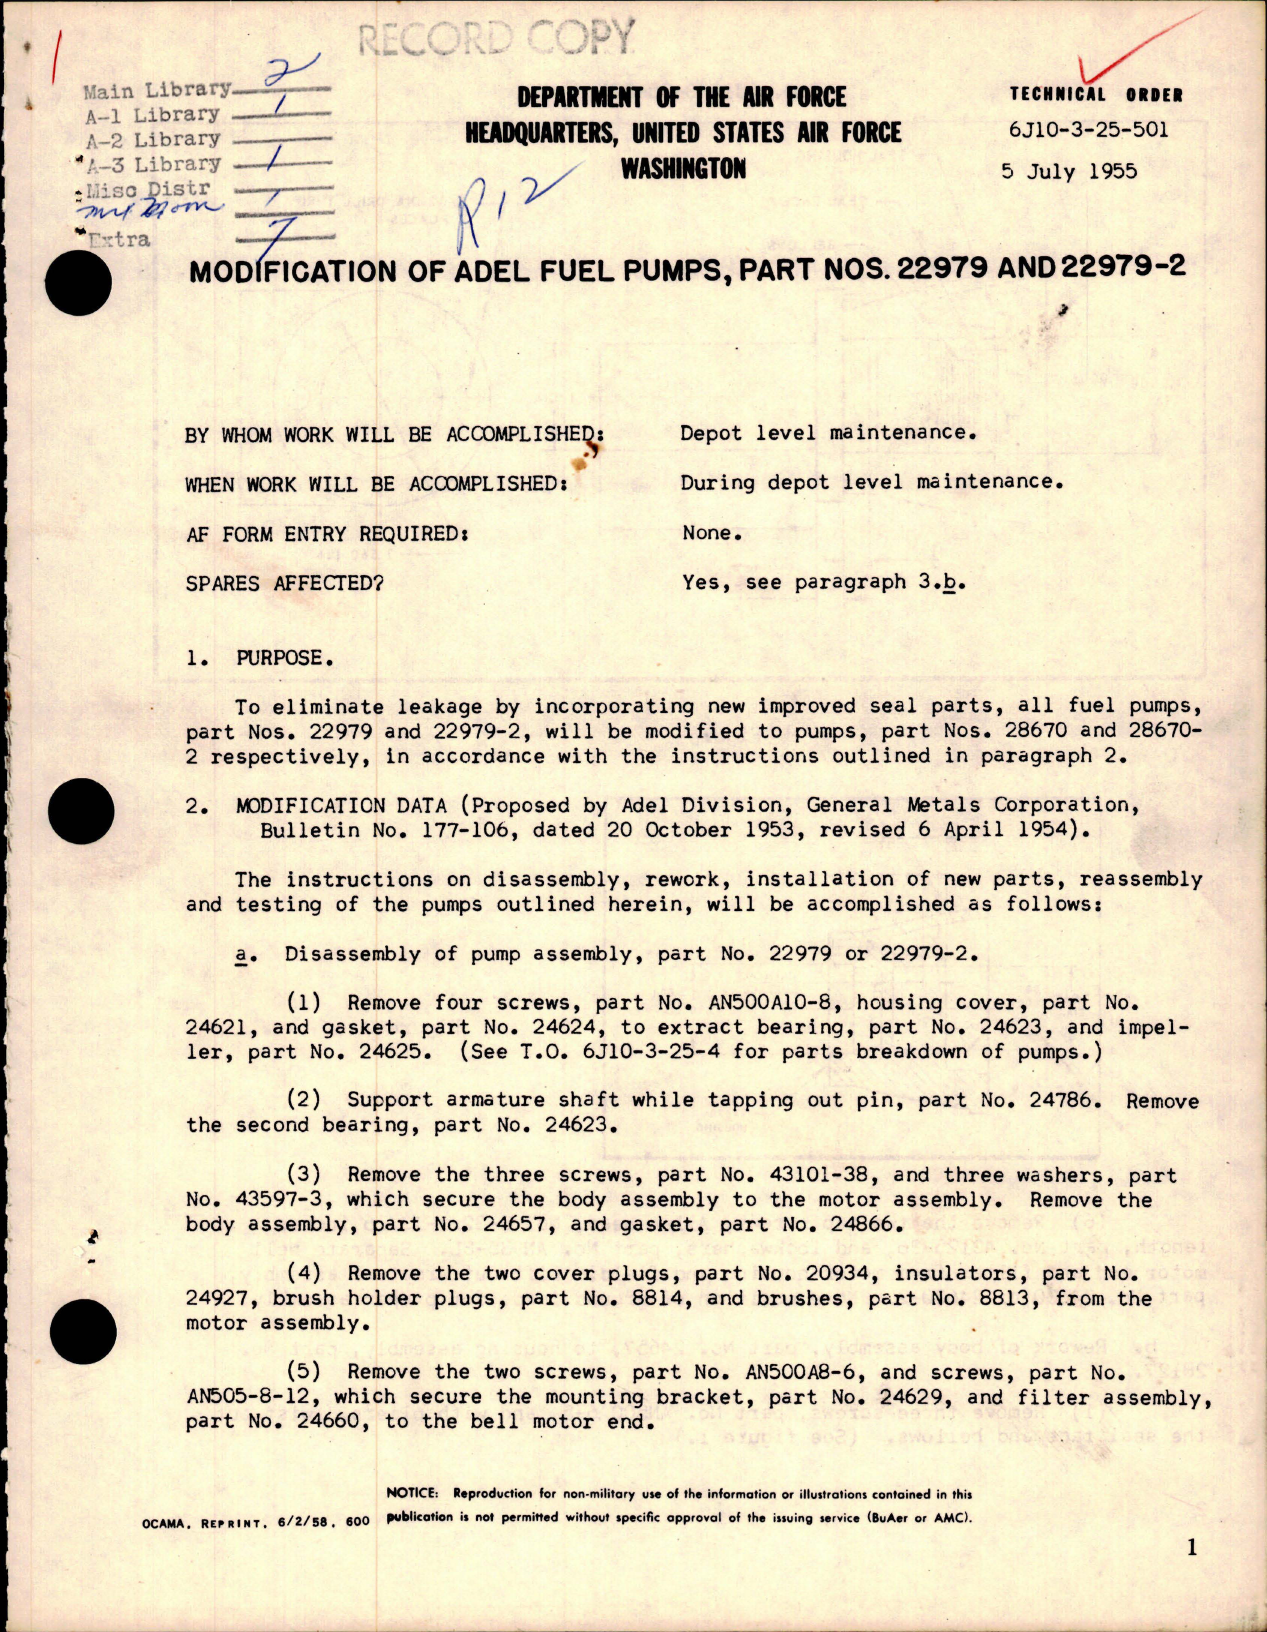 Sample page 1 from AirCorps Library document: Modification of Adel Fuel Pumps - Parts 22979 and 22979-2